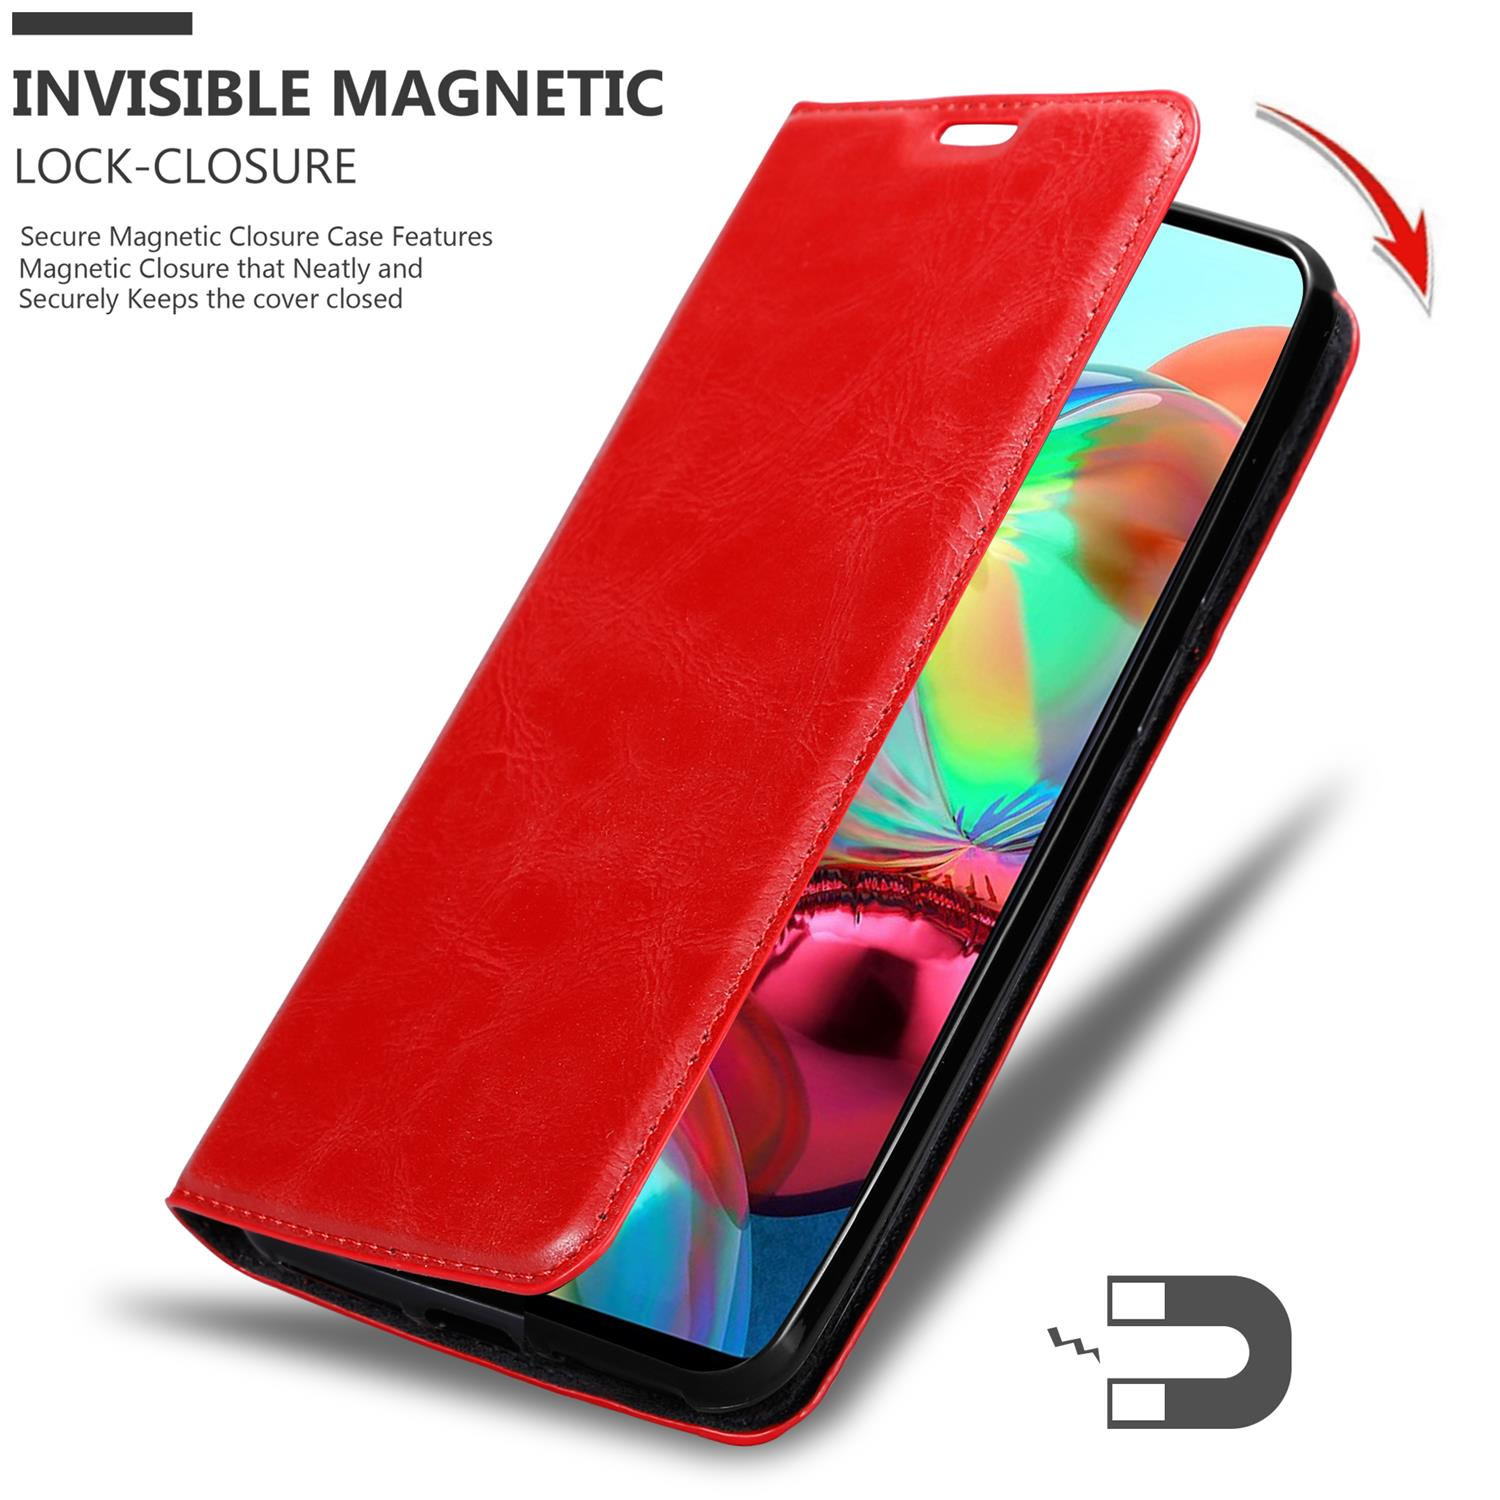 5G, APFEL ROT Invisible Magnet, Book 4G Bookcover, Samsung, Galaxy CADORABO / A72 Hülle